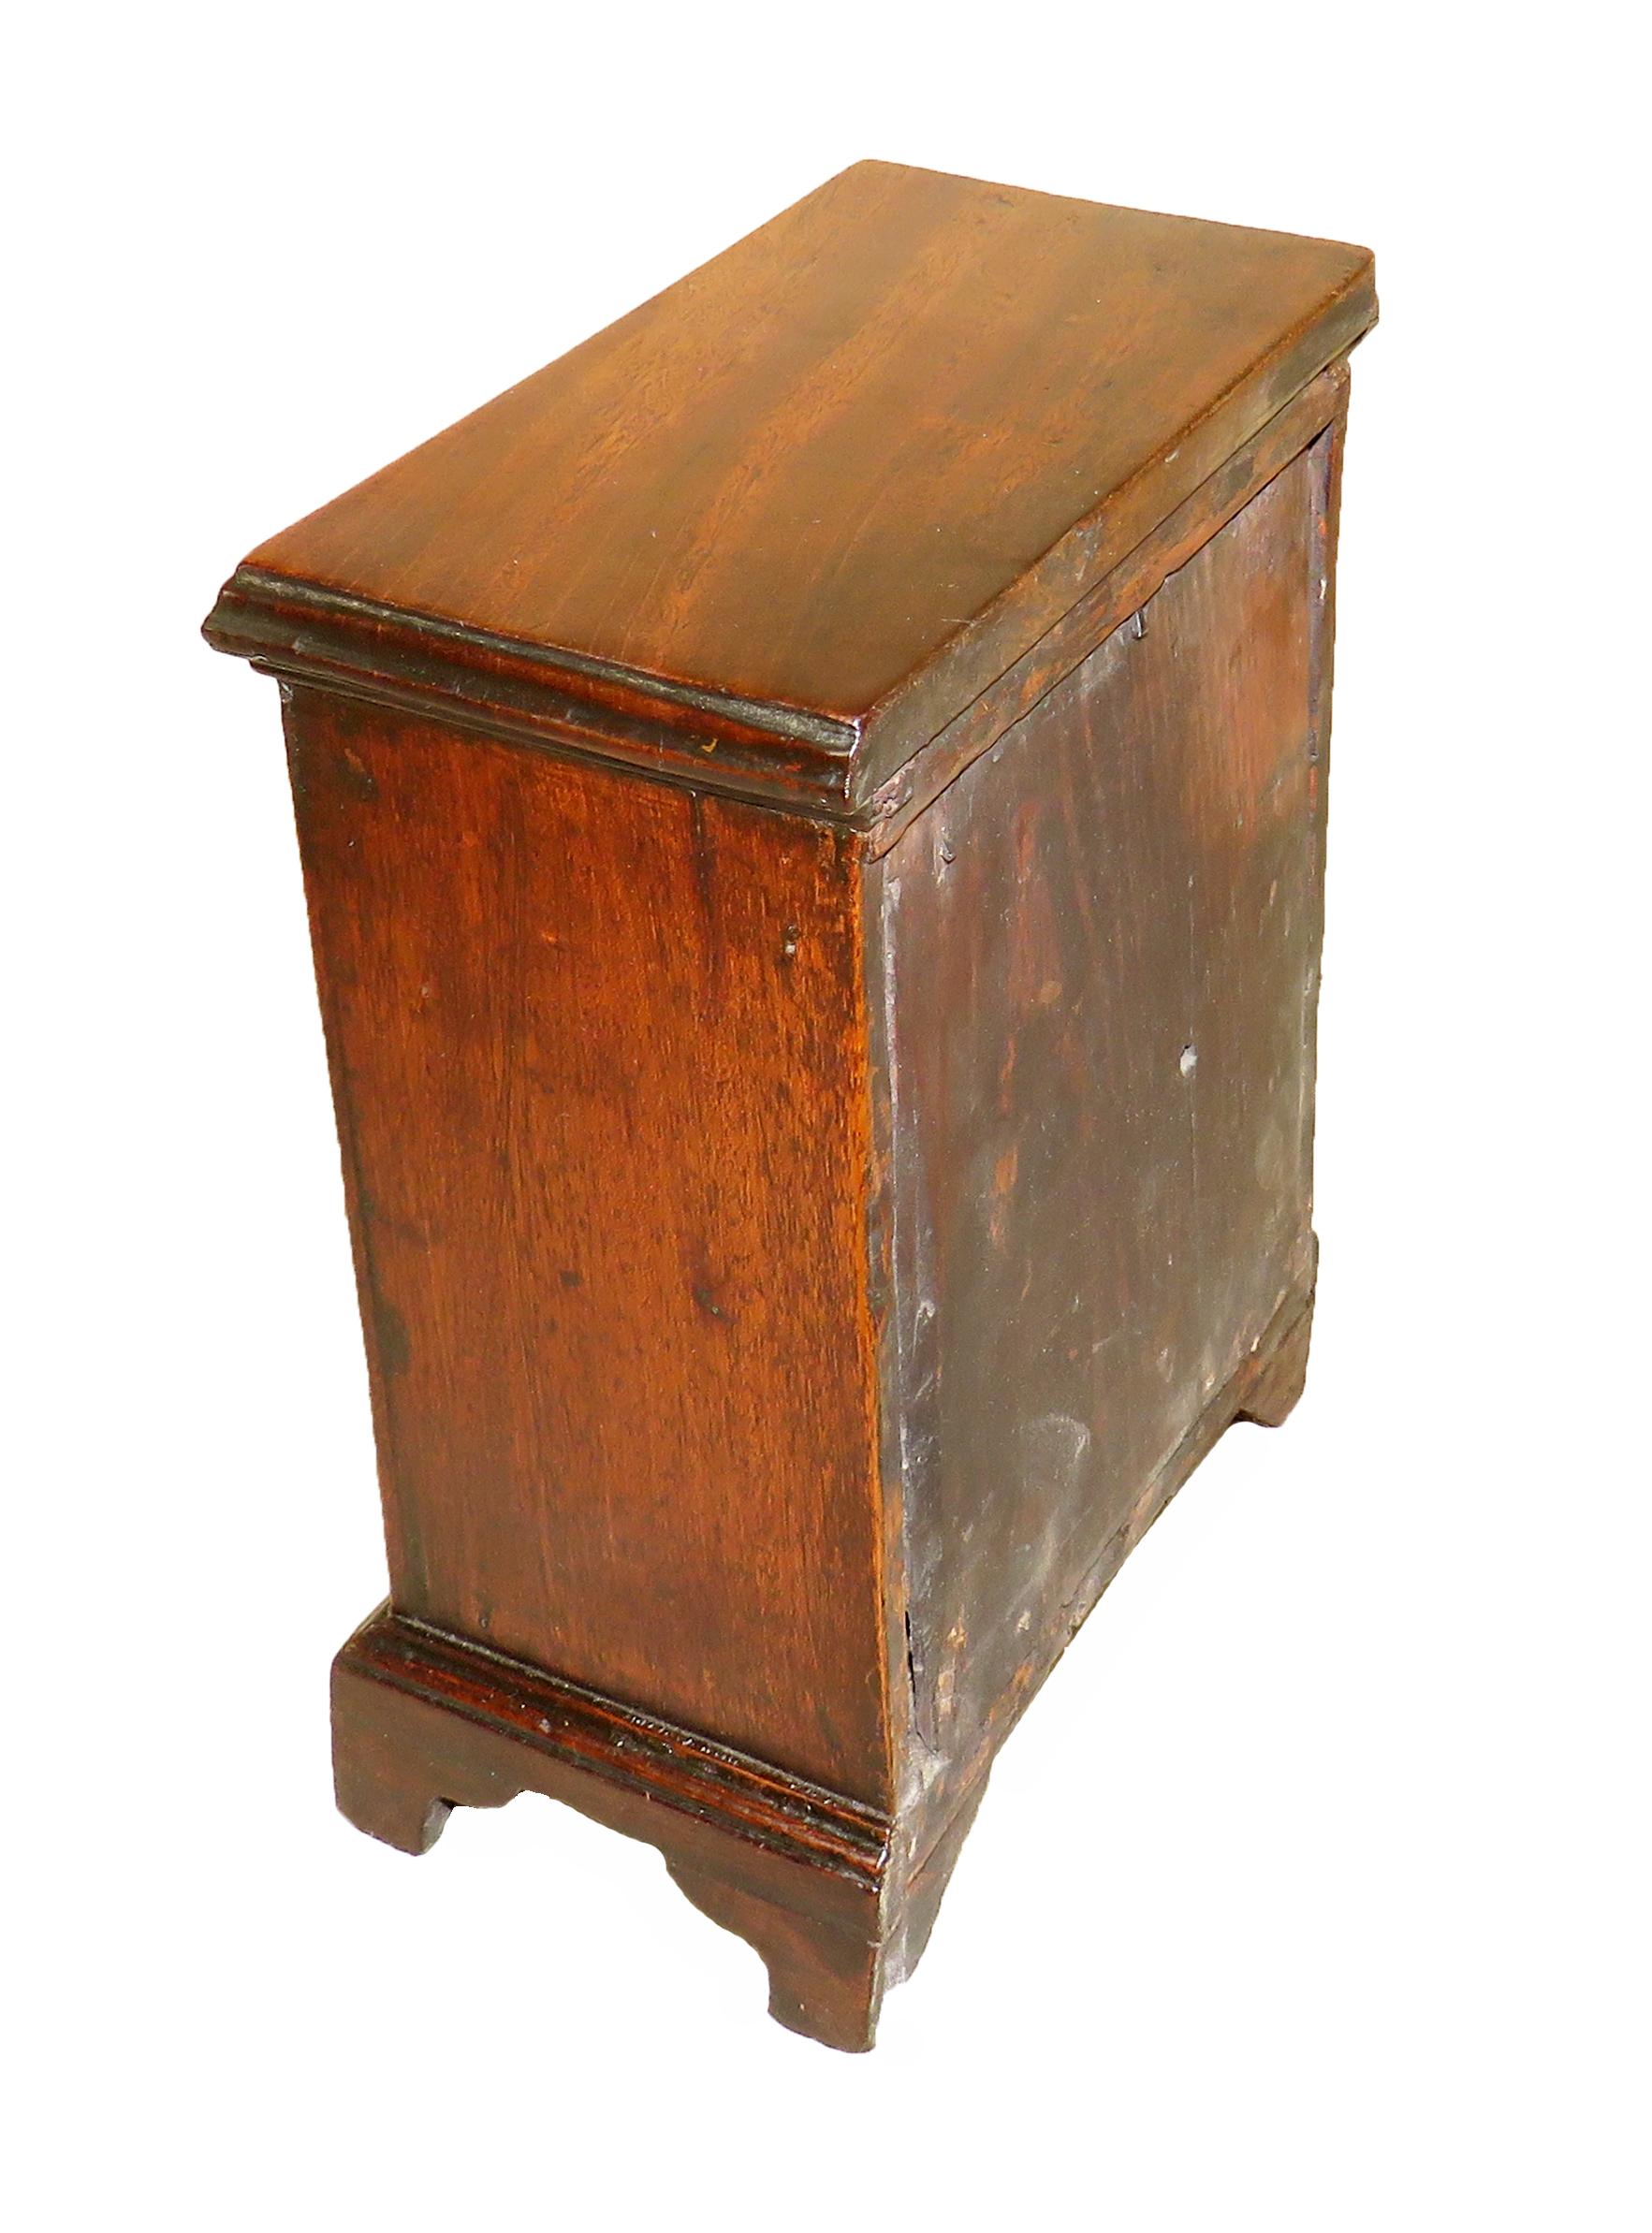 A charming mid-18th century mahogany miniature chest
retaining exceptional untouched color and patina with
two short and three long drawers and original brass
handles raised on original ashaped bracket feet

(Much discussion is had over the